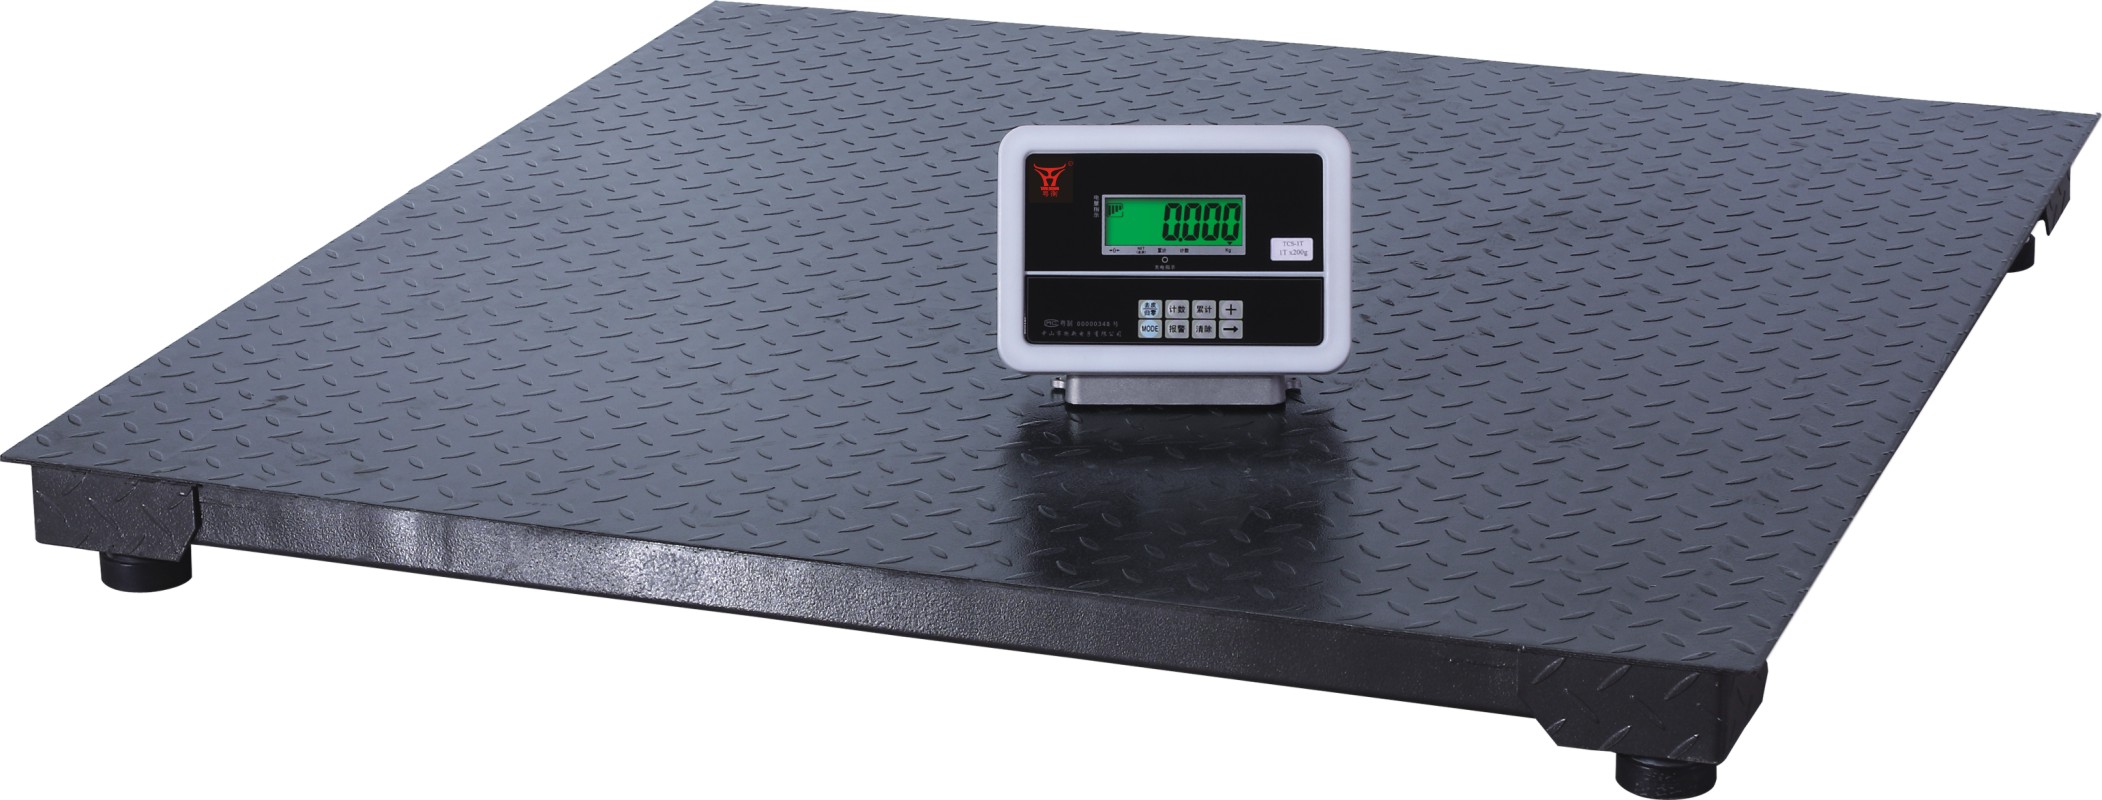 Precision in Practice: Industrial Scales and Weighing Equipment in Manufacturing and Logistics